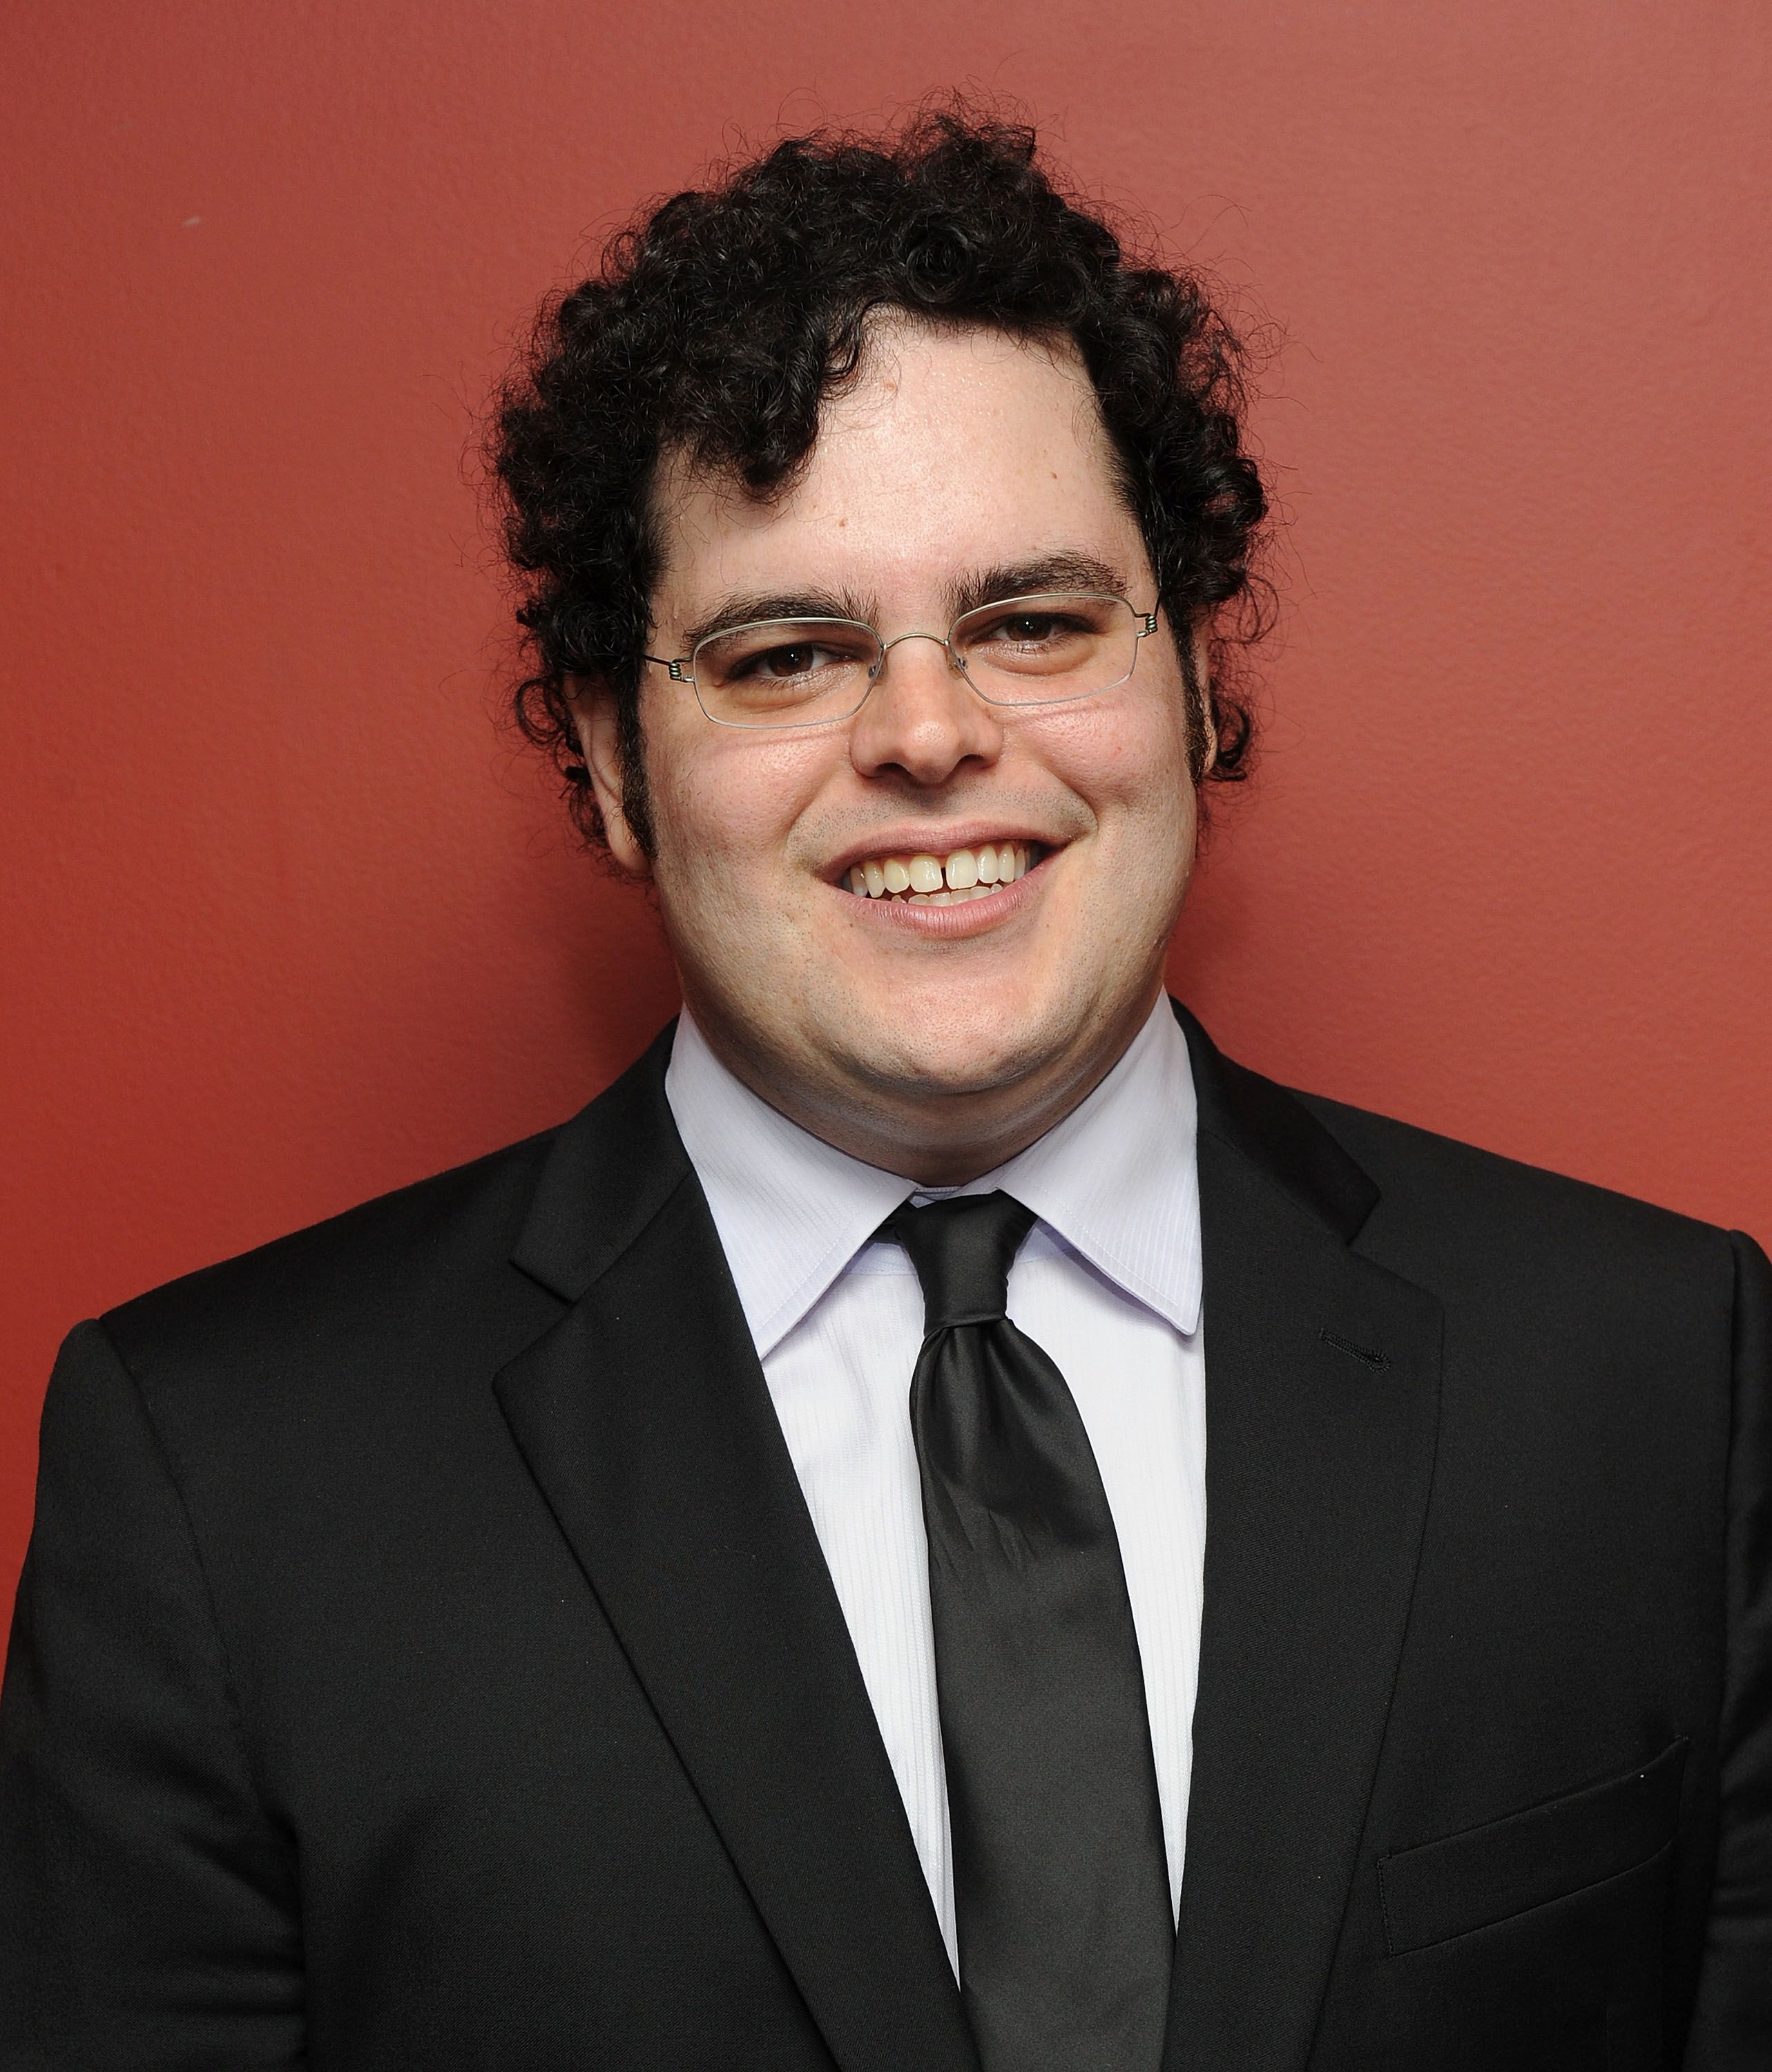 book Of Mormons Josh Gad Kept An Upfronts Diary For Vulture